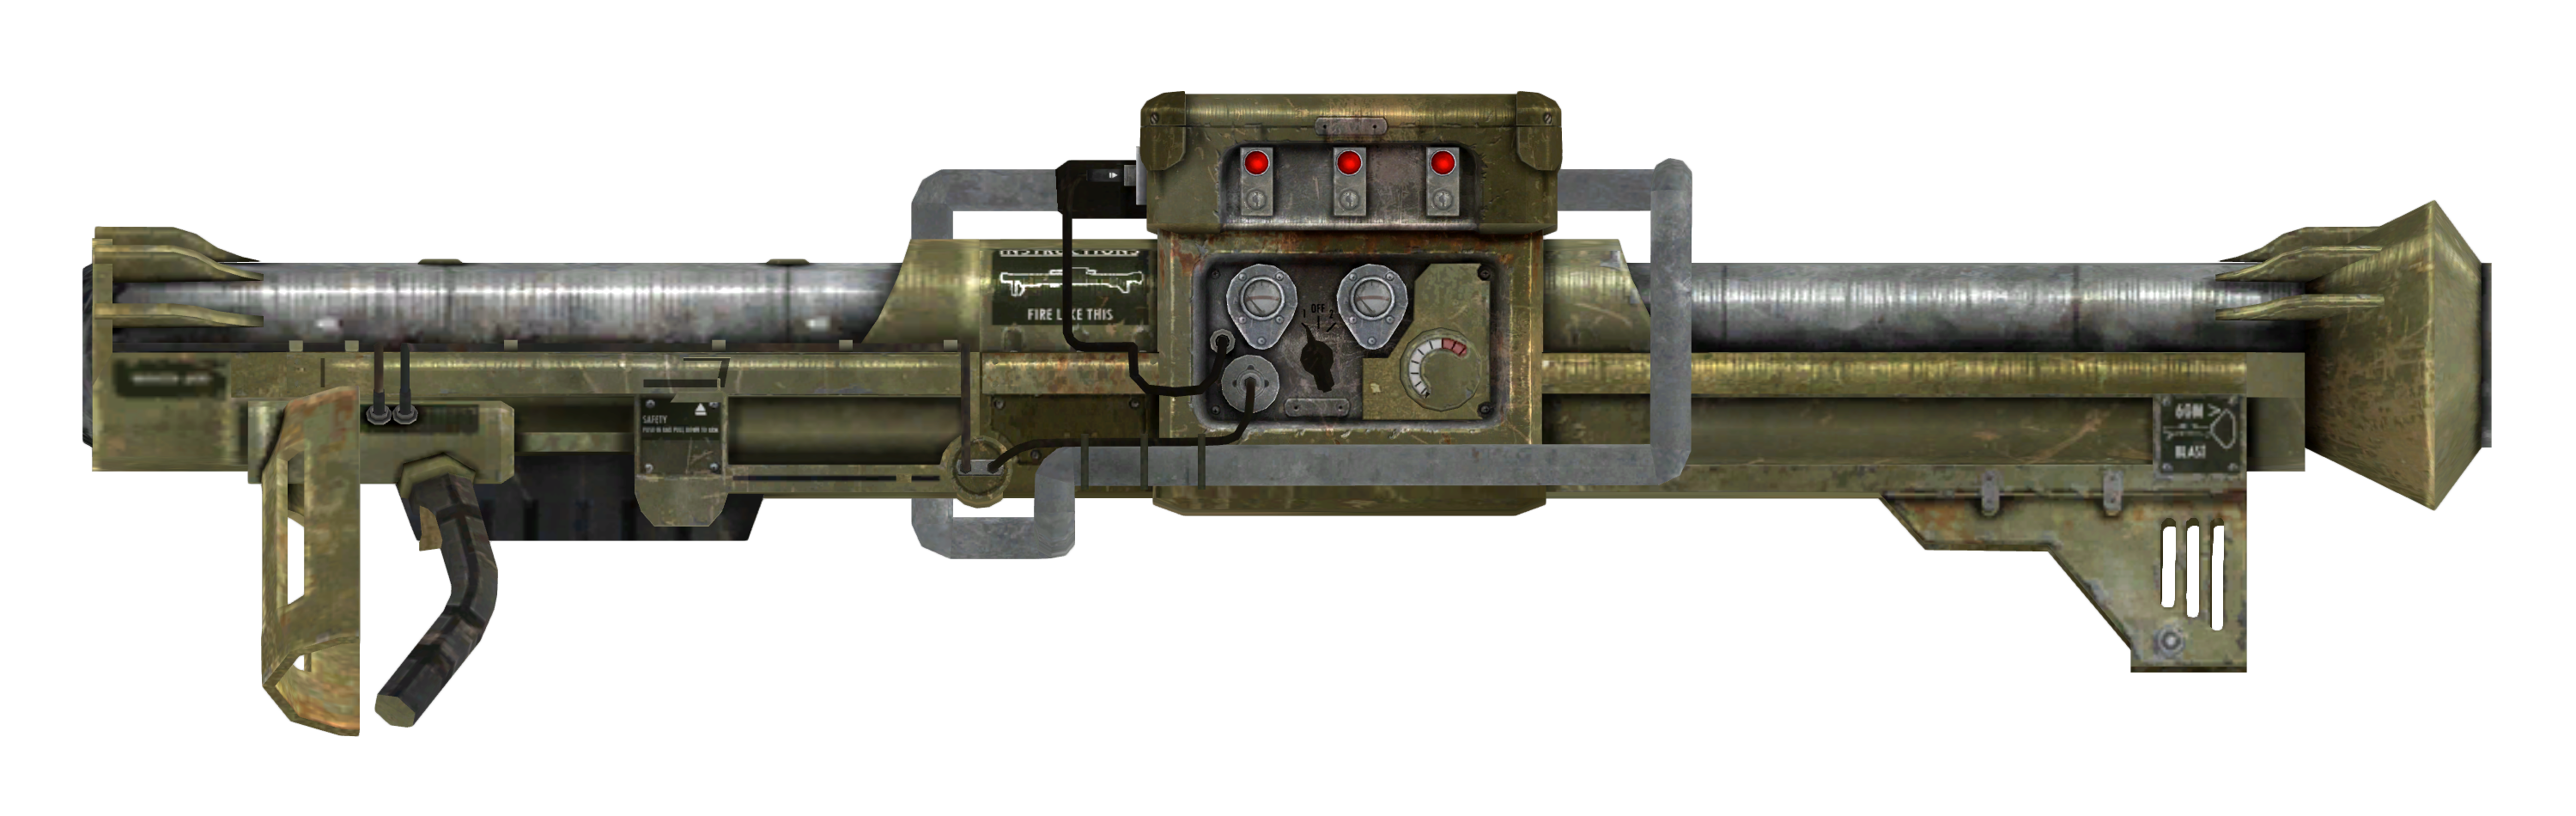 Missile Launcher (Fallout 3) - Independent Fallout Wiki